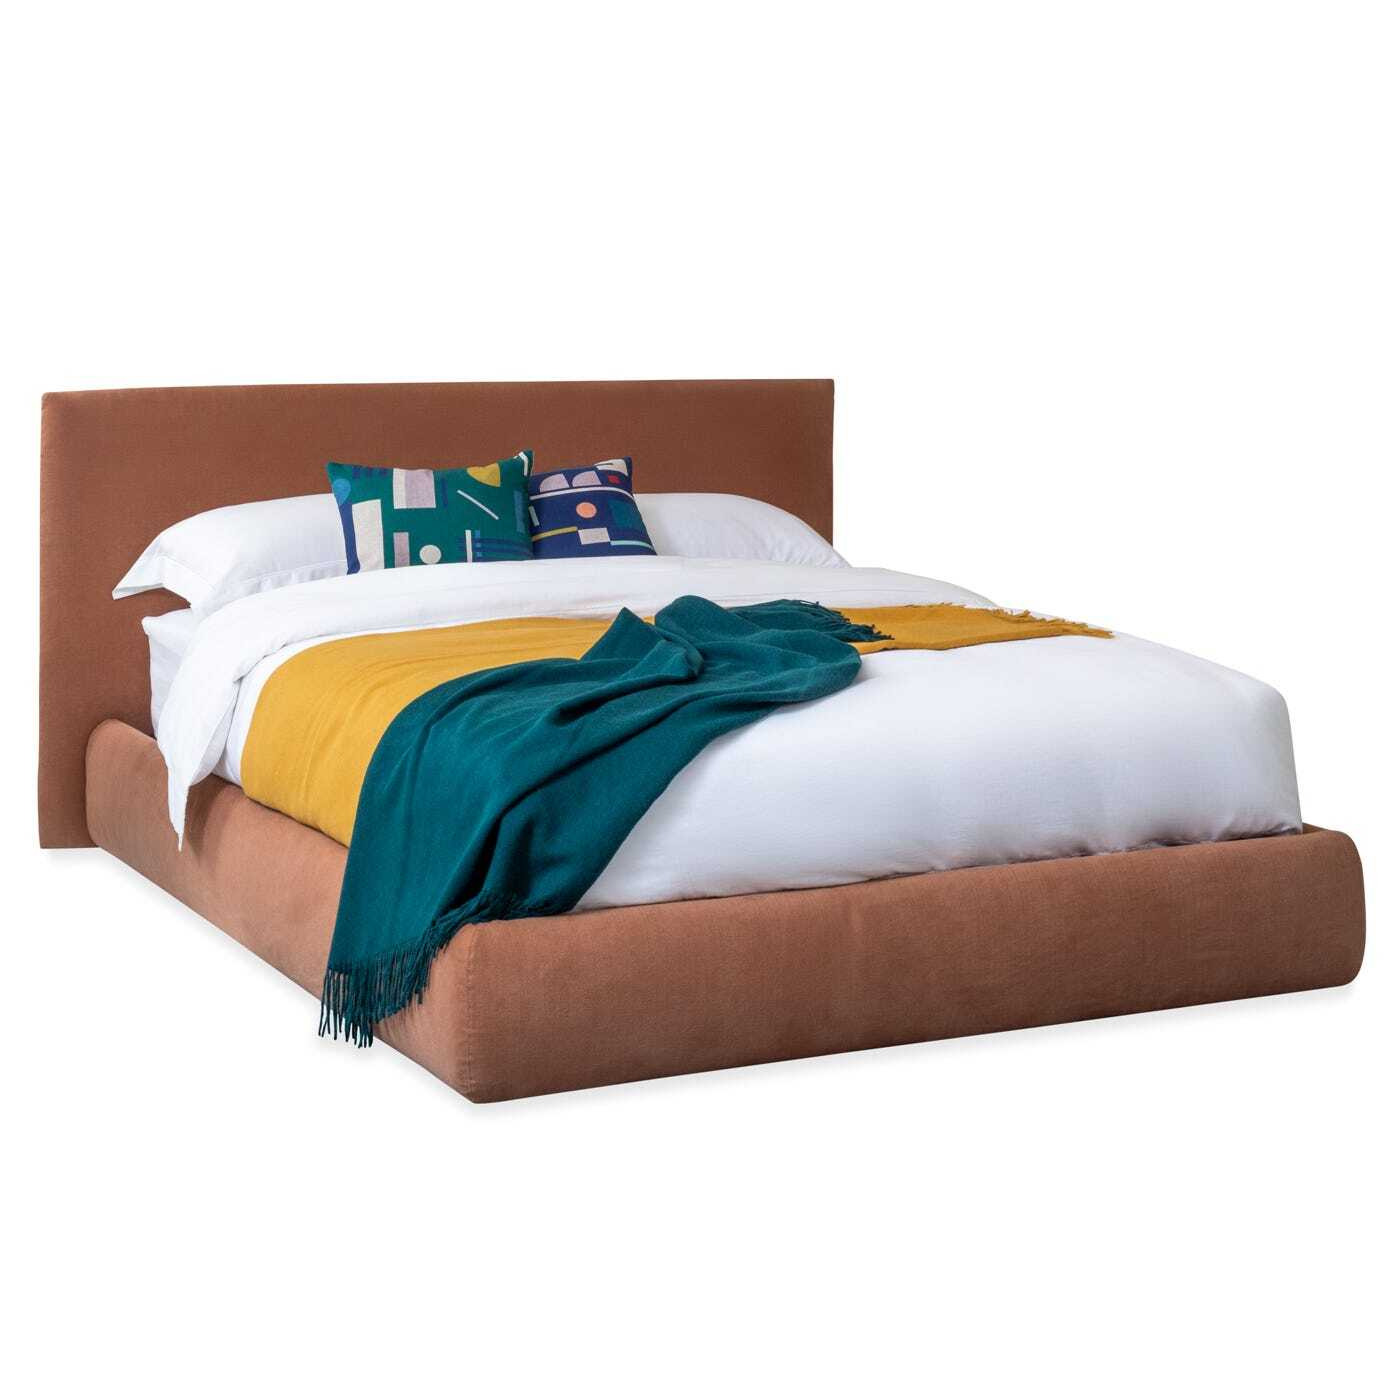 Heal's Alba Bed Super King Siena Cotton Clay